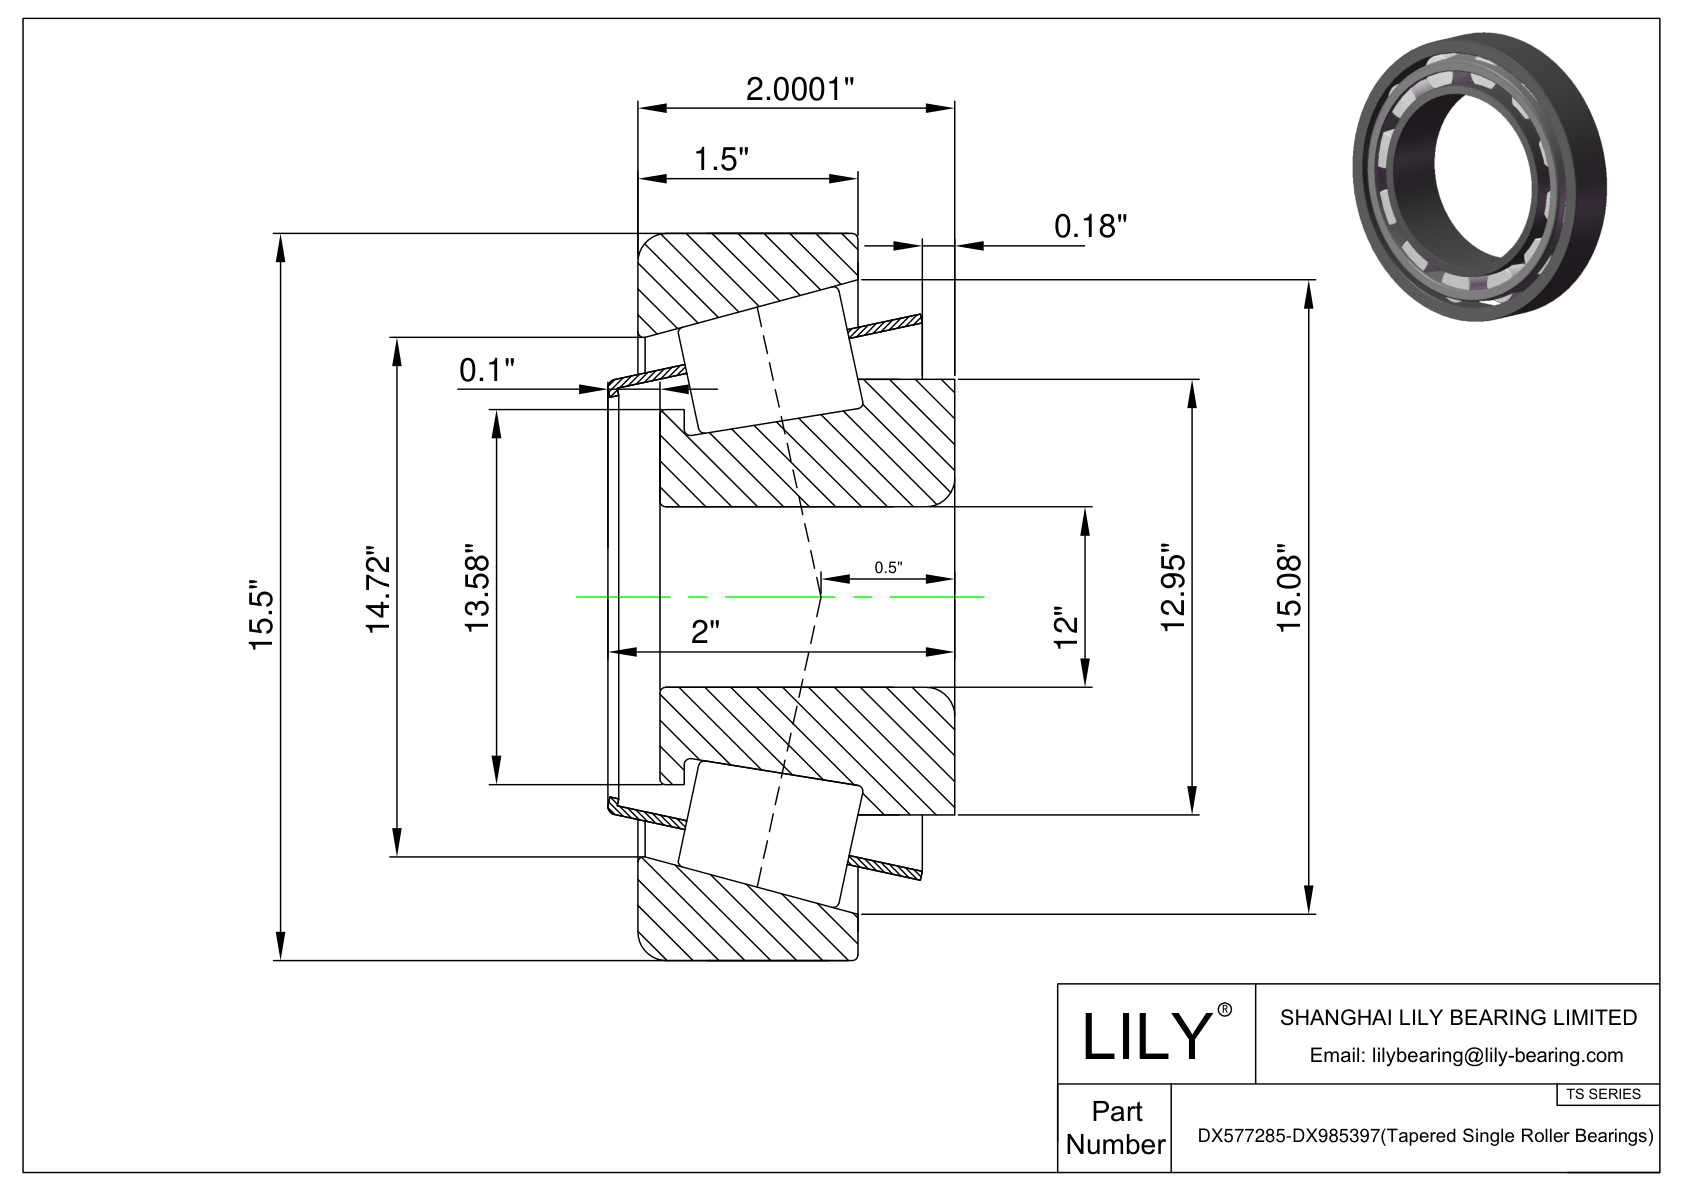 DX577285-DX985397 TS (Tapered Single Roller Bearings) (Imperial) cad drawing